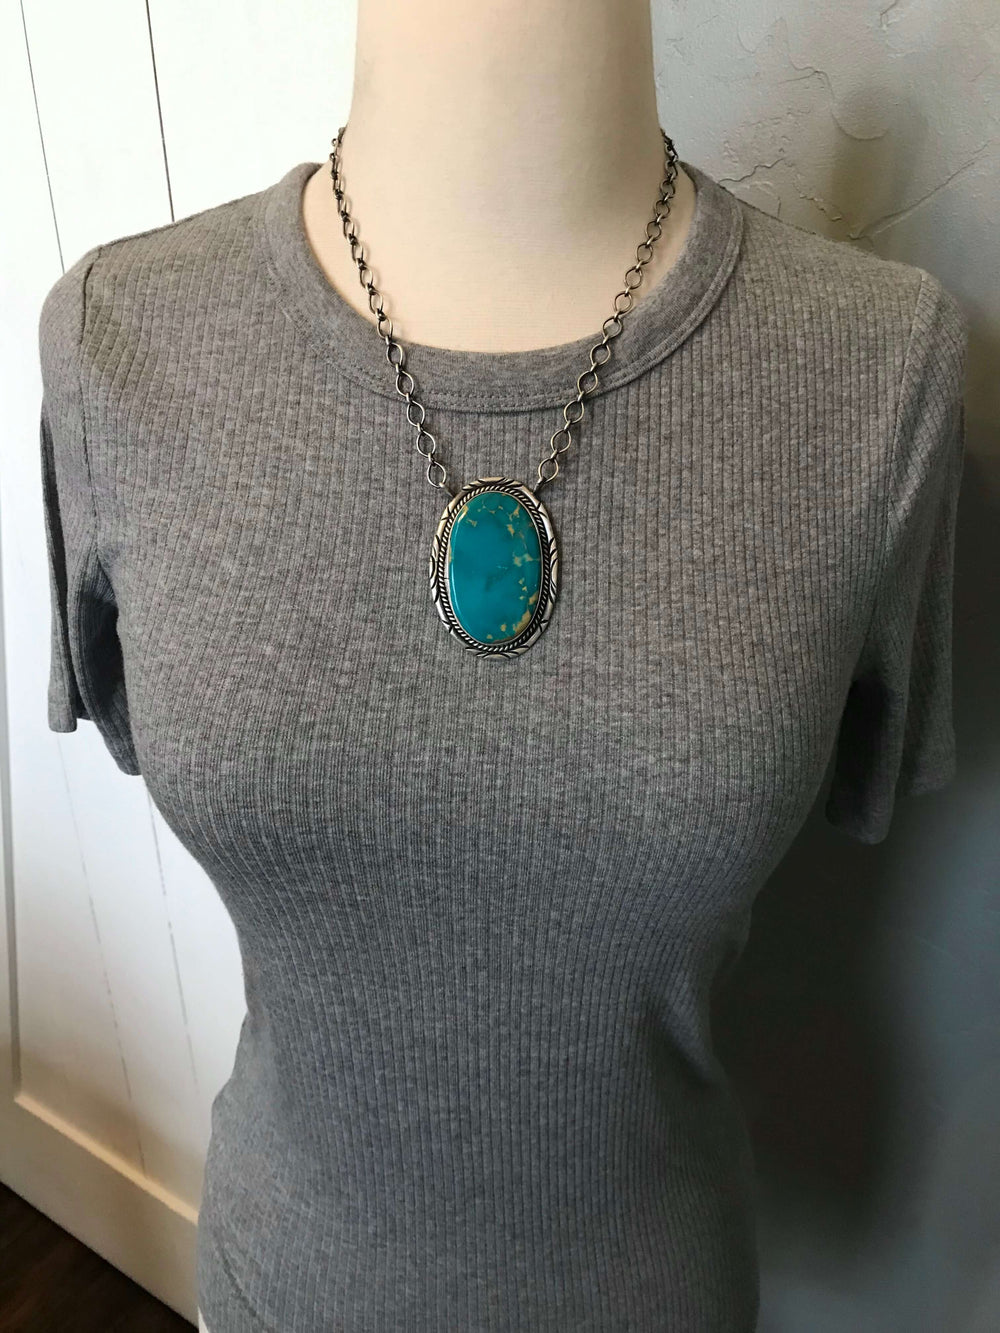 The Eagle Mountain Turquoise Necklace, 3-Necklaces-Calli Co., Turquoise and Silver Jewelry, Native American Handmade, Zuni Tribe, Navajo Tribe, Brock Texas